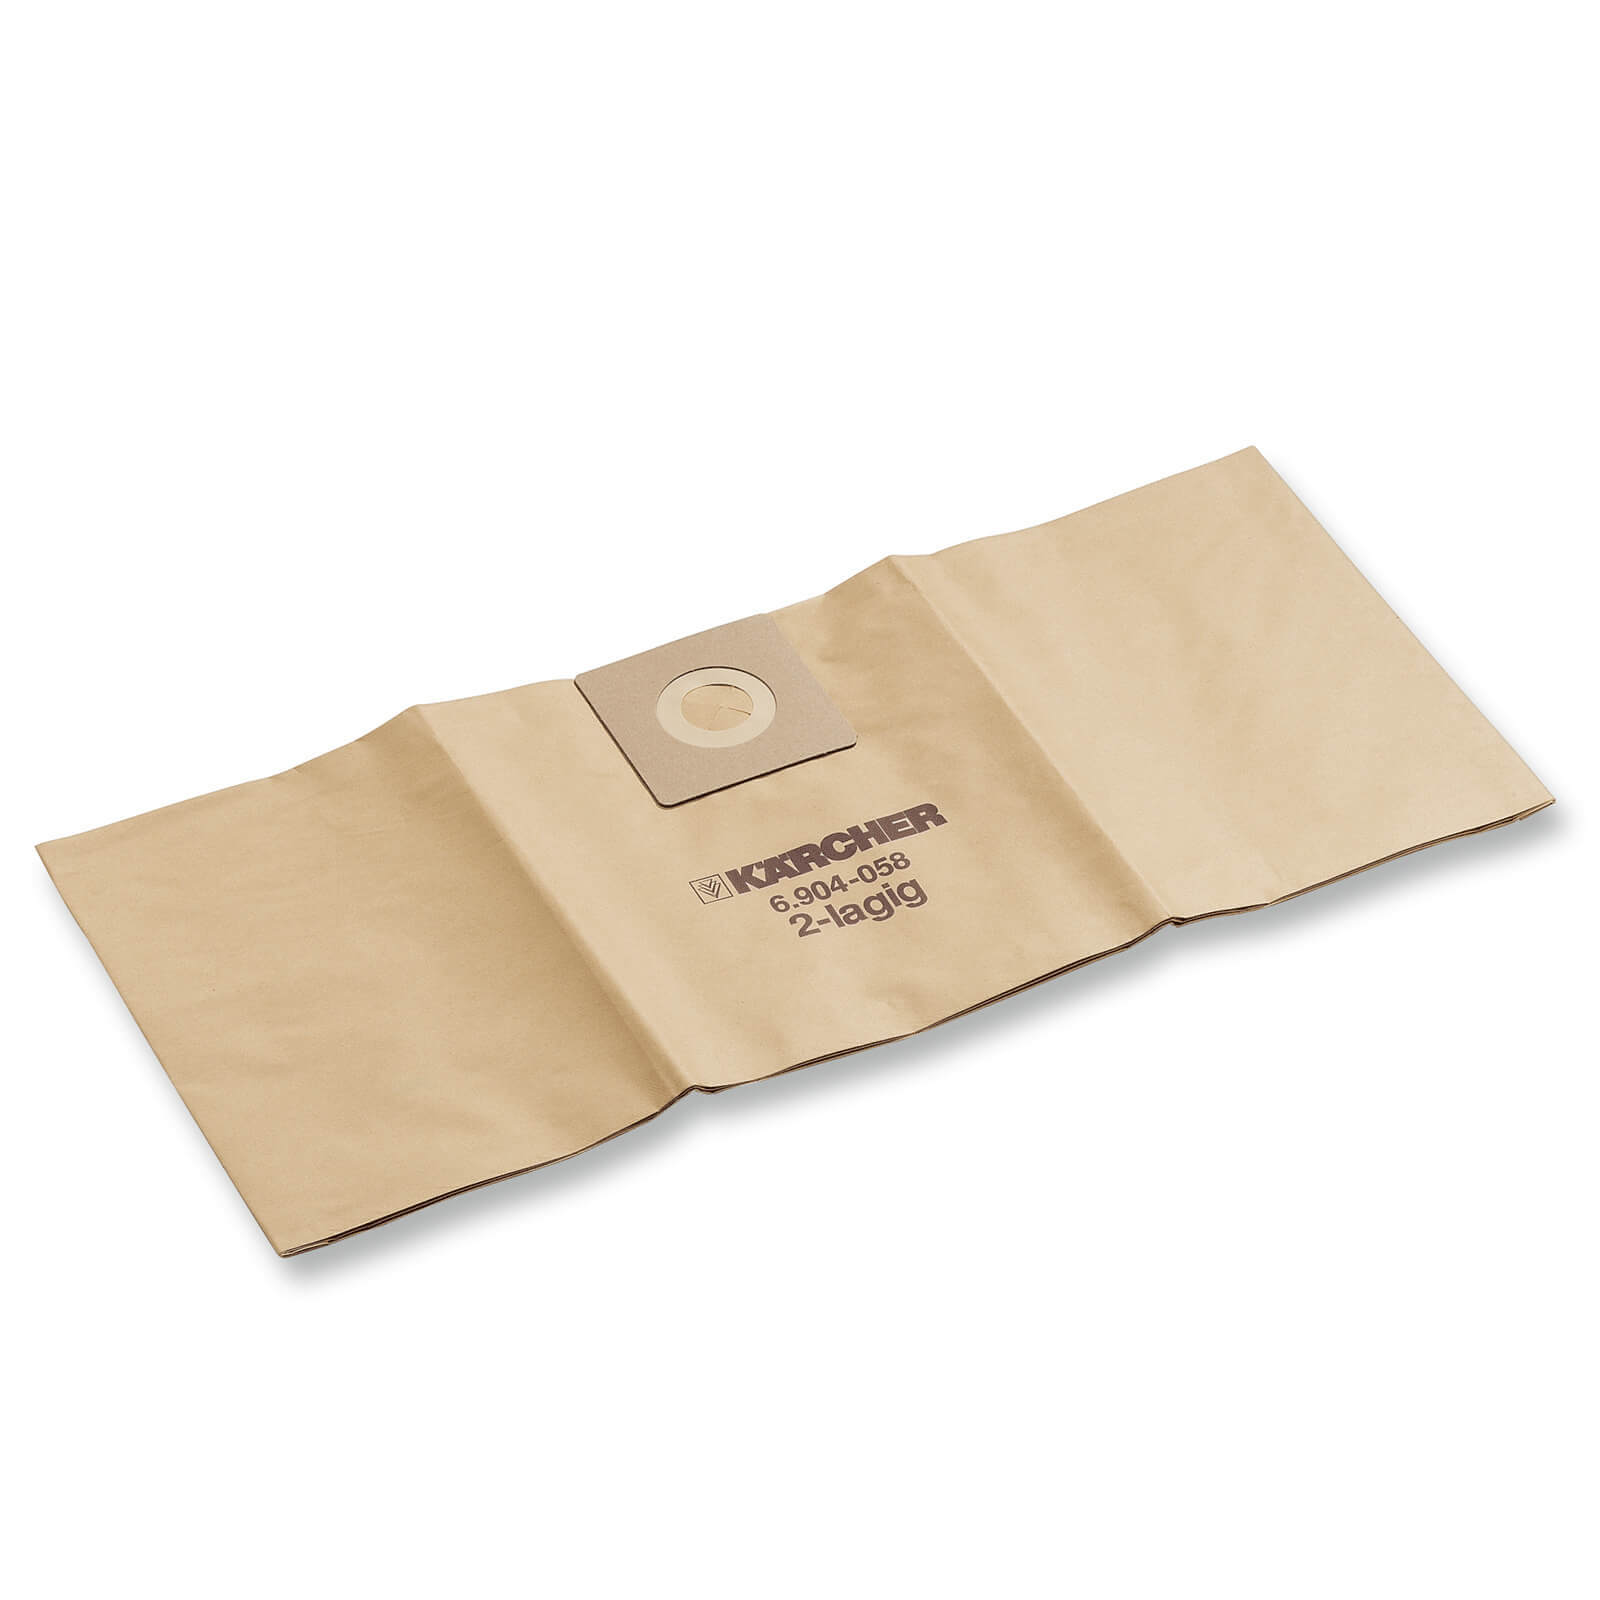 Photos - Vacuum Cleaner Karcher M Class Paper Filter Dust Bags for NT 35/1  Pack of 